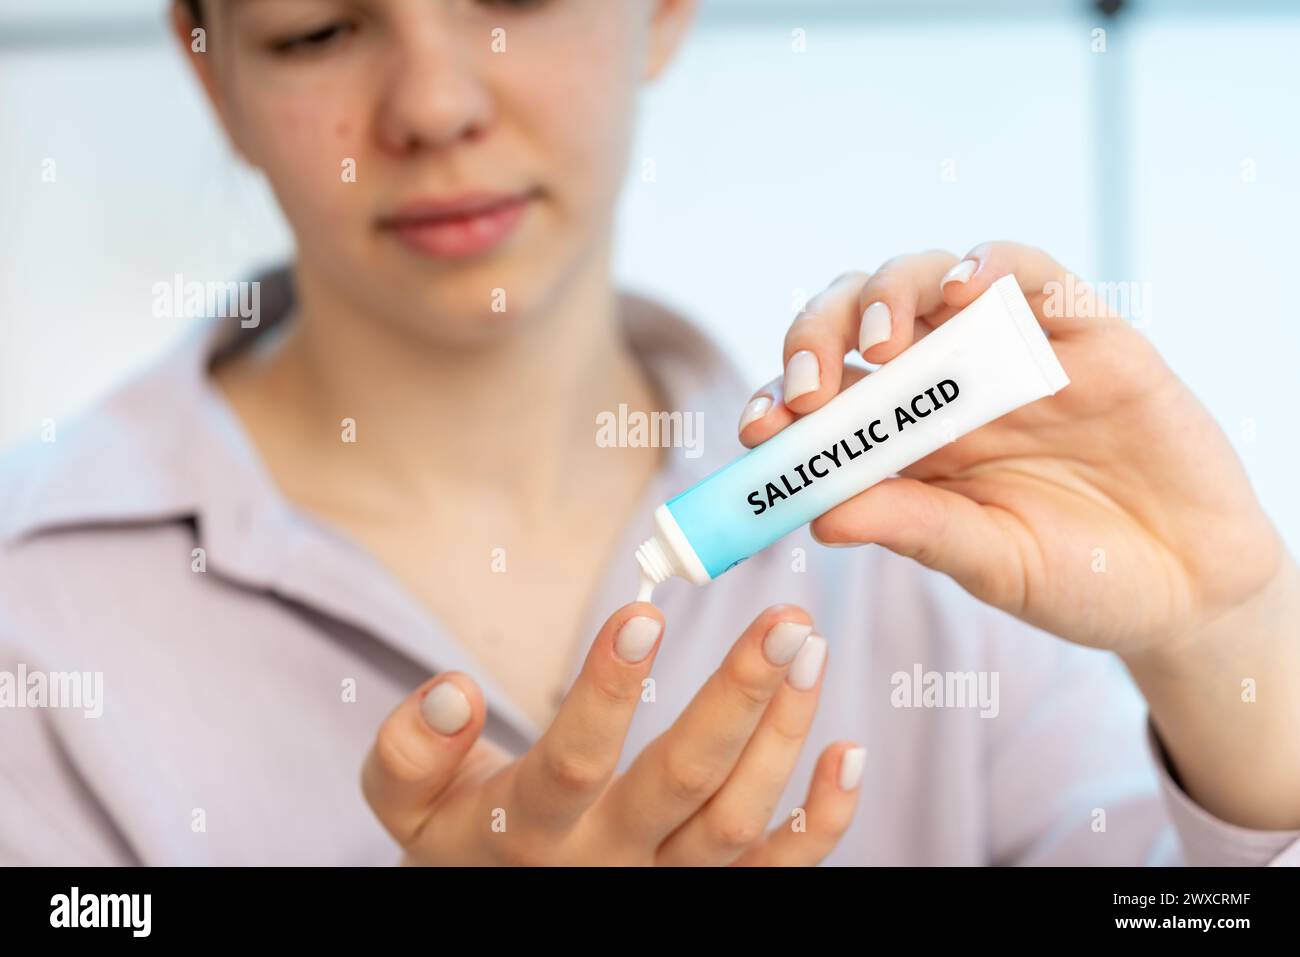 Salicylic acid medical cream, conceptual image. A keratolytic cream that helps exfoliate the skin and is commonly used to treat acne, psoriasis, and warts. Stock Photo